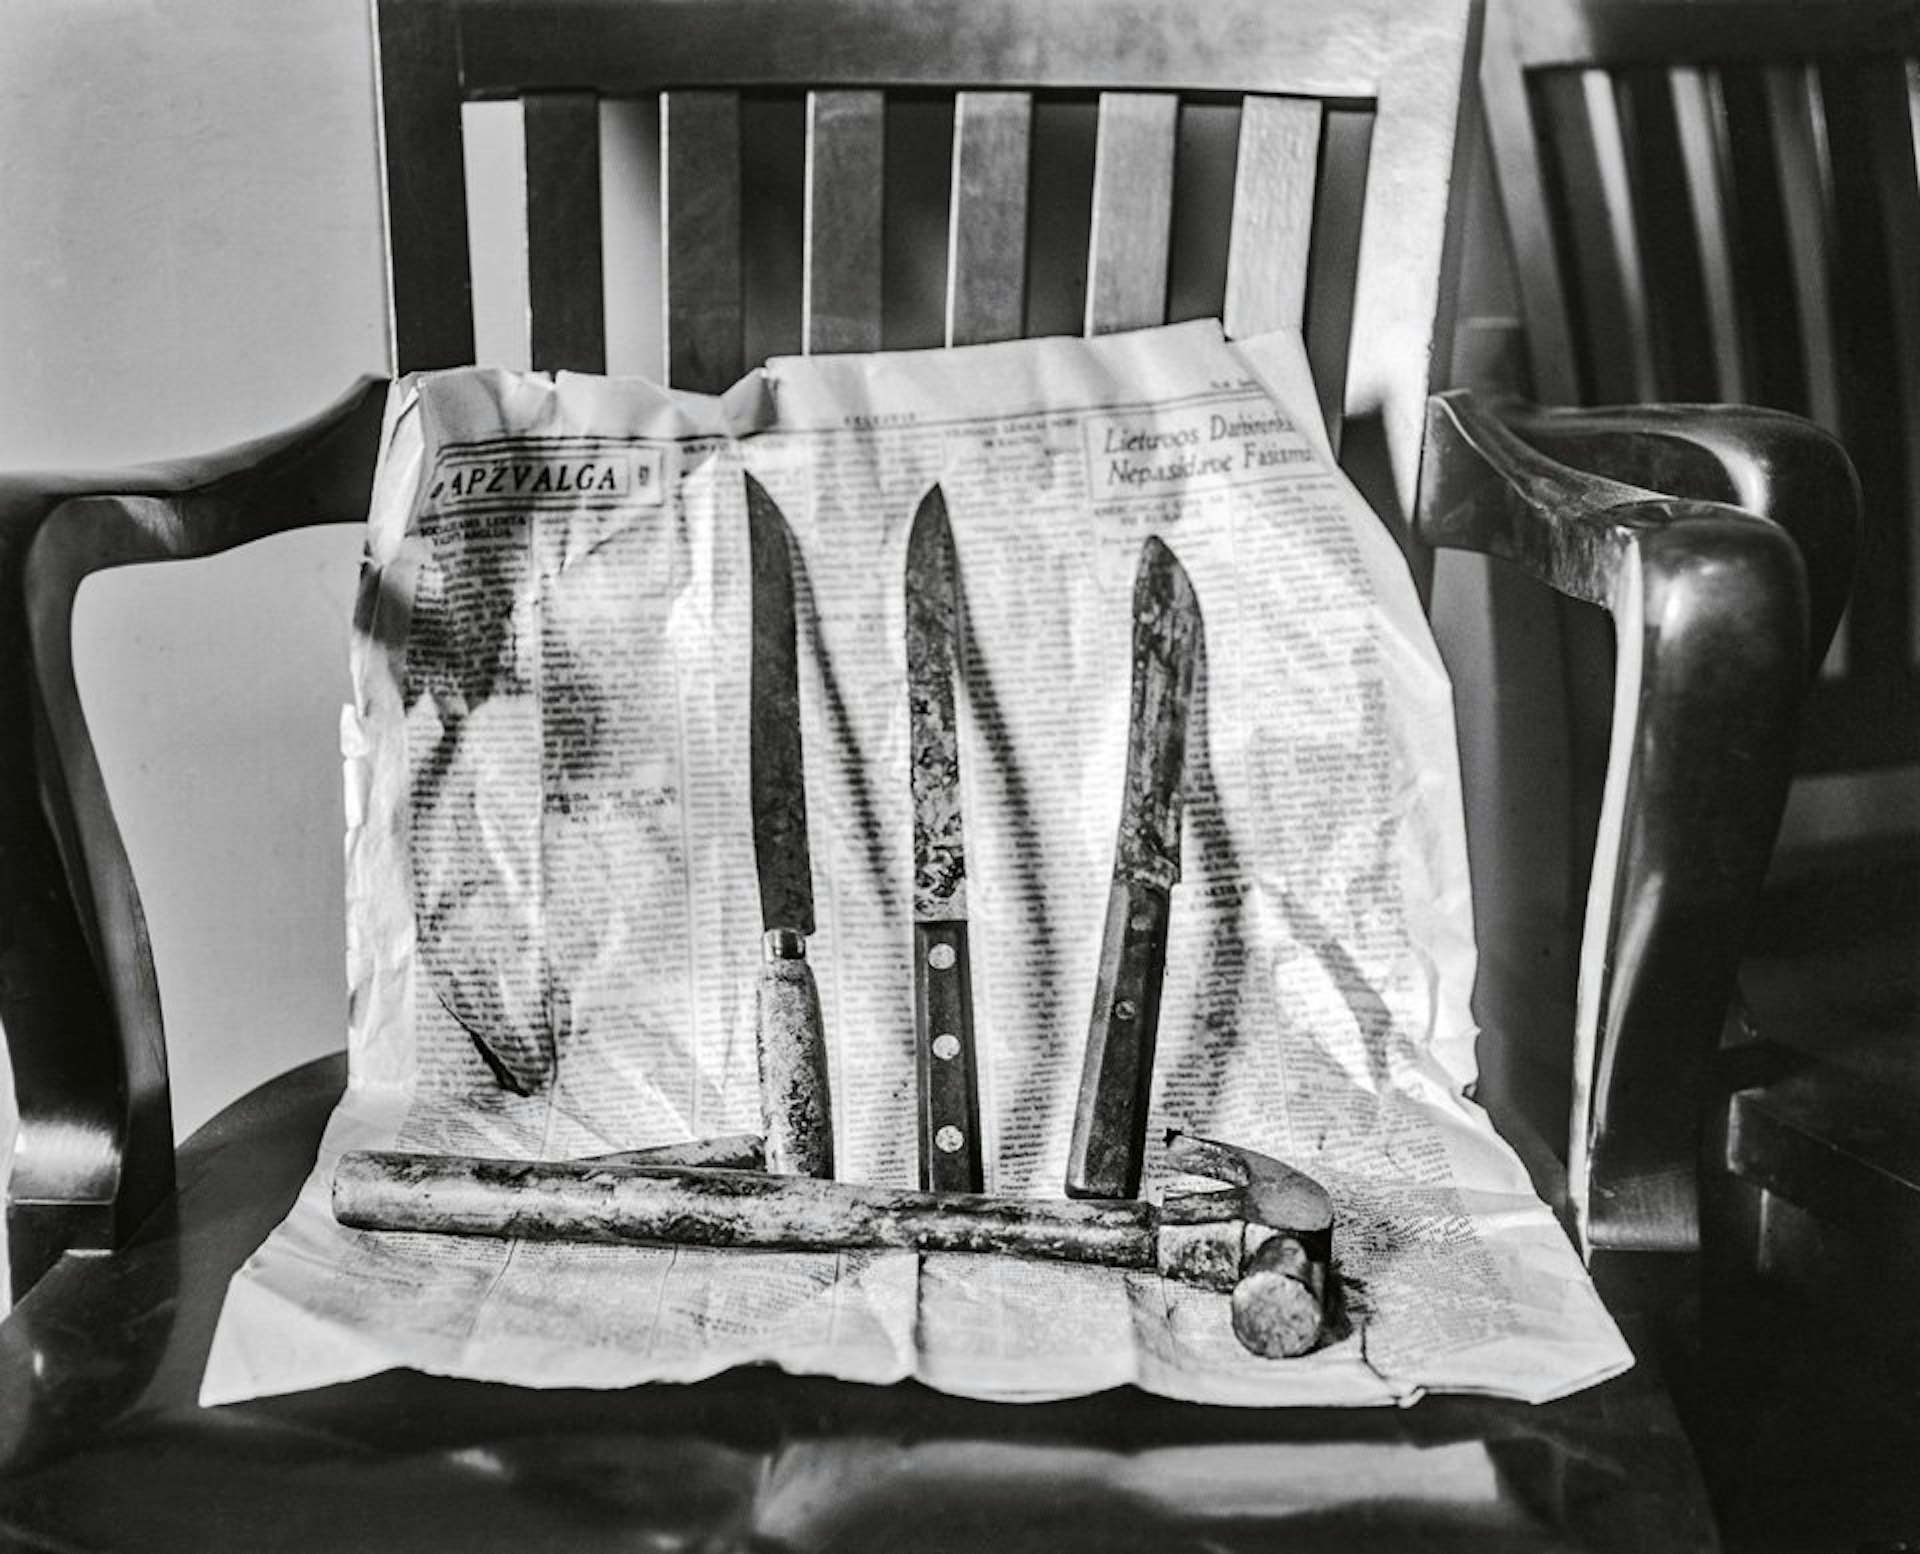 The bloody evidence of a murder spree awaits processing at police headquarters, ca. 1930. Copyright: Cliff Wesselmann Photo Courtesy of Gregory Paul Williams, BL Press LLC / TASCHEN